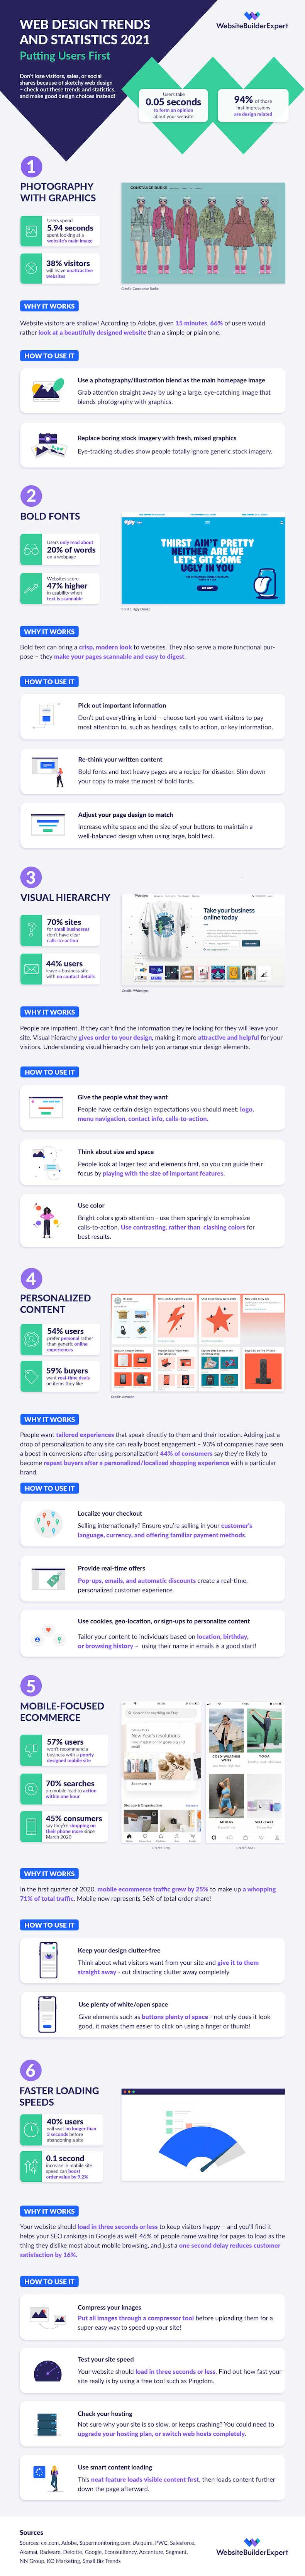 2021 Web Design Stats and Trends